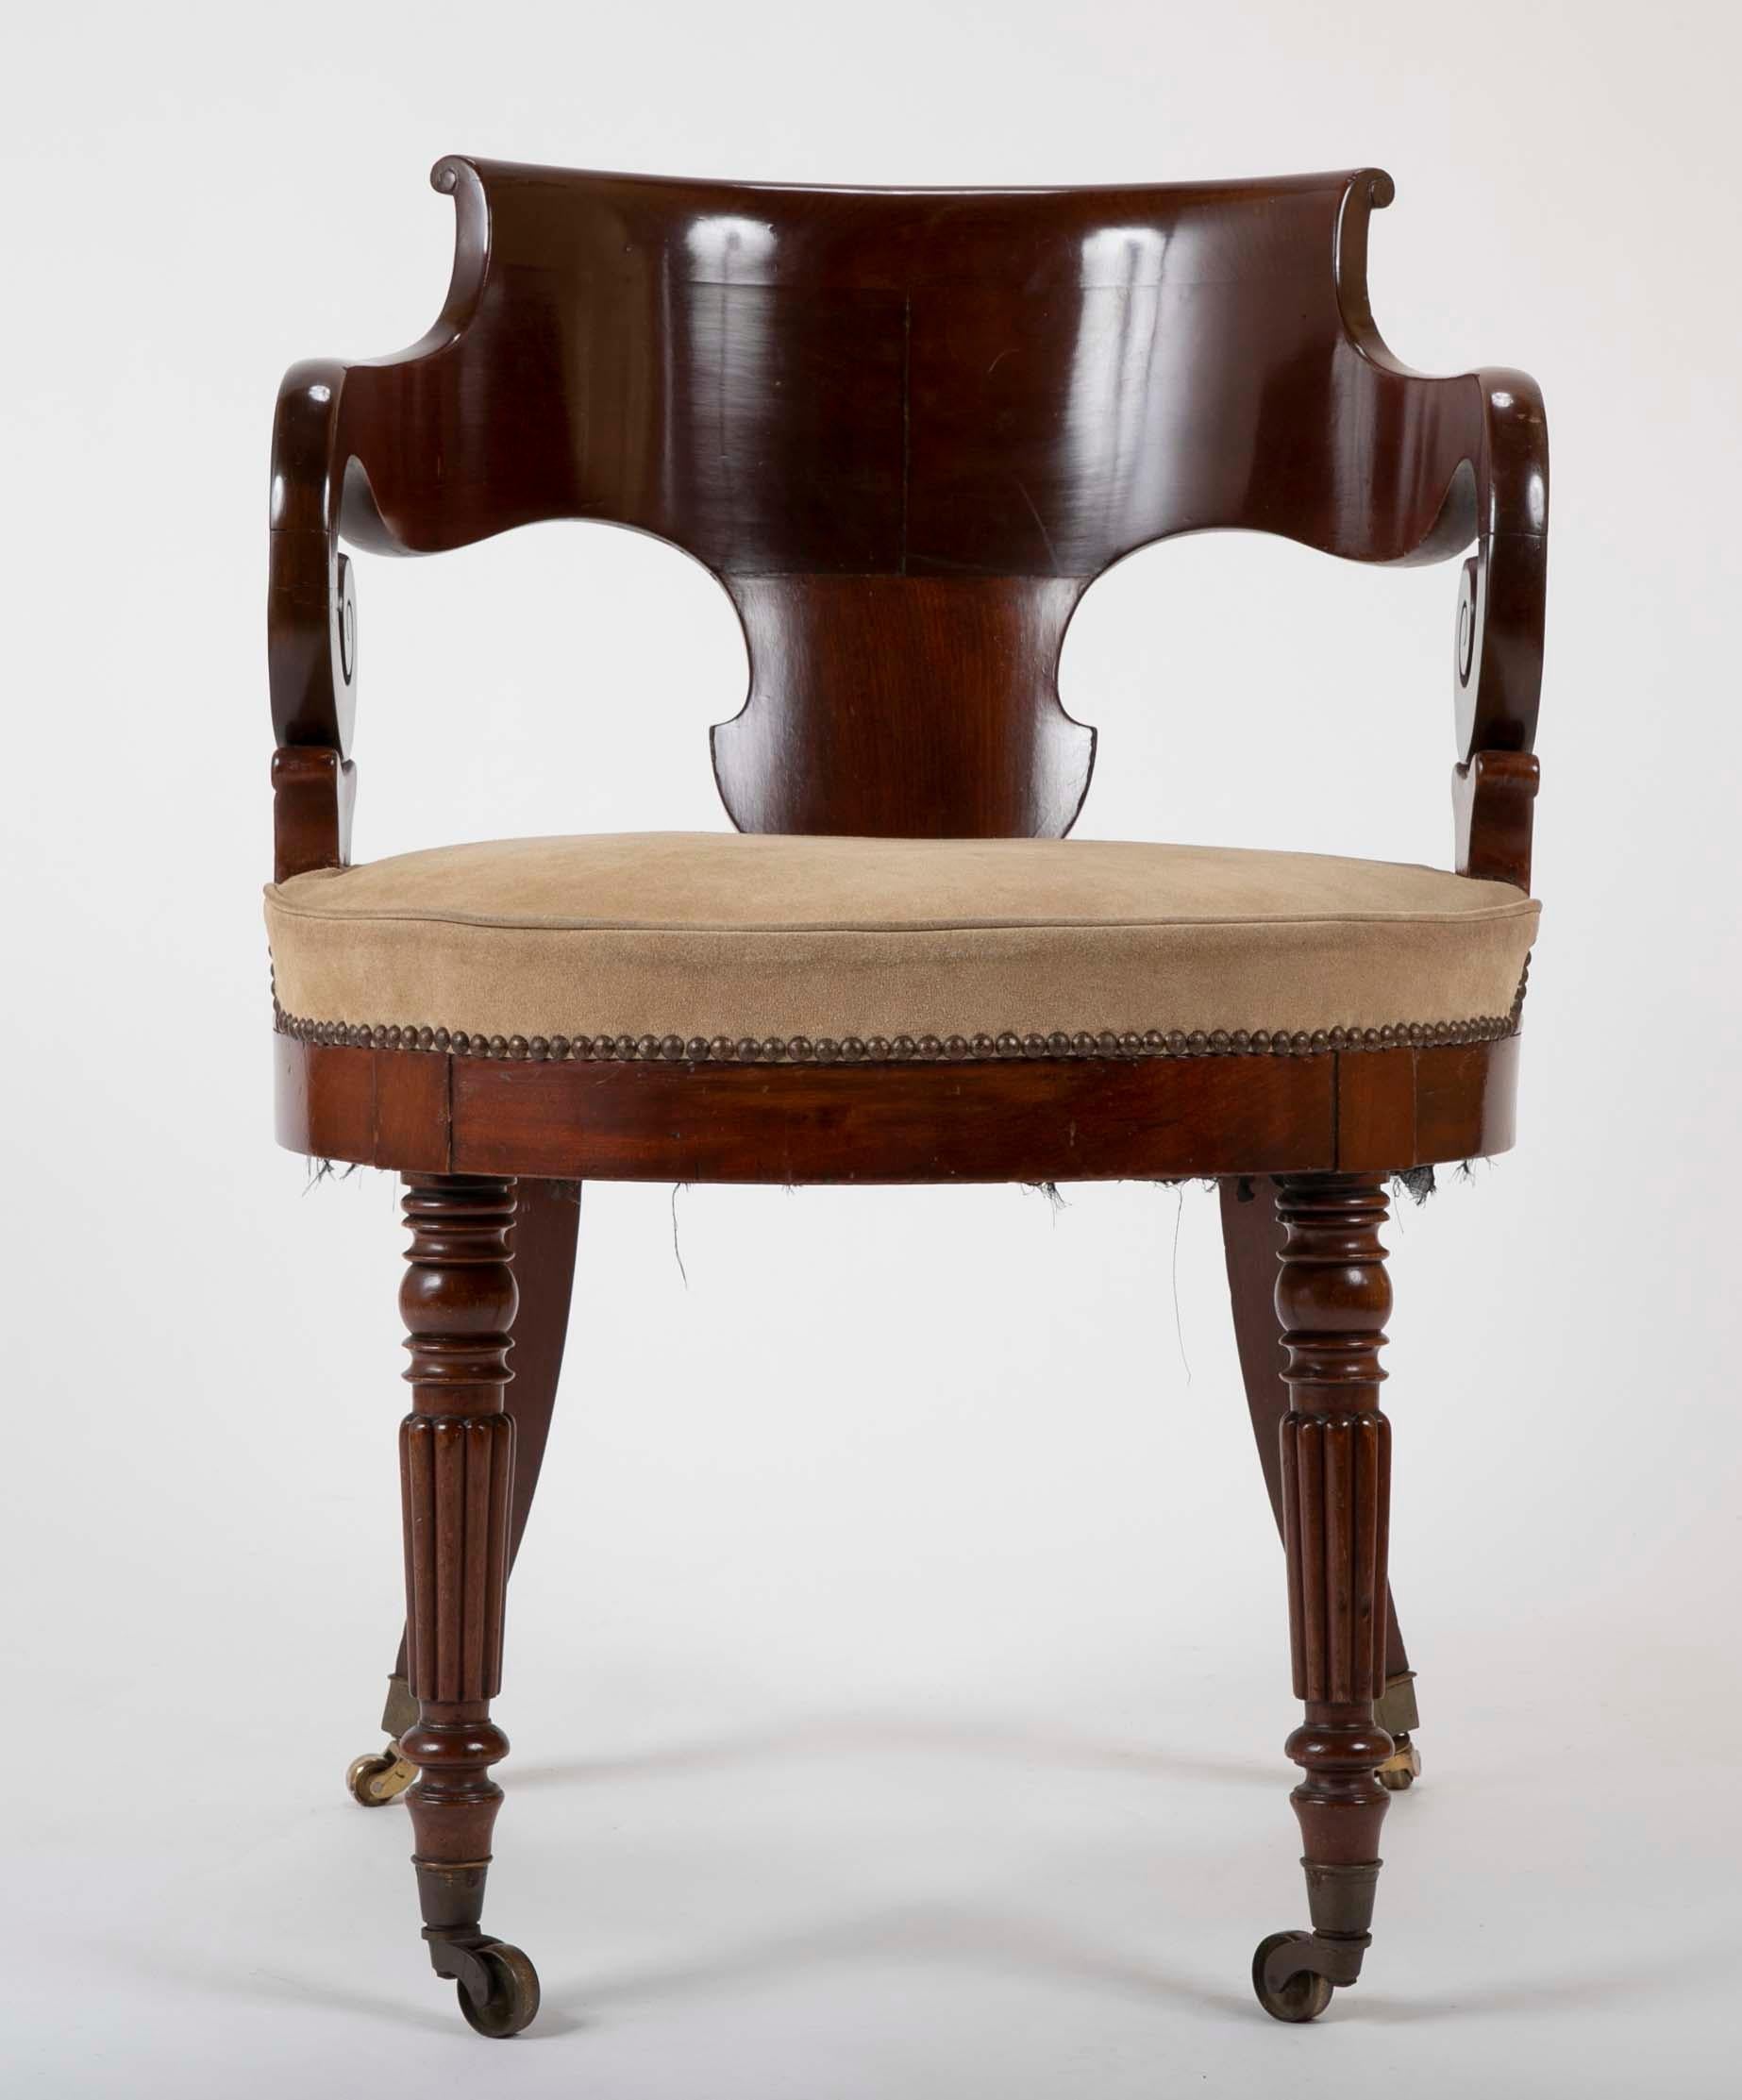 A Restauration period mahogany armchair with great lines and suede upholstery.